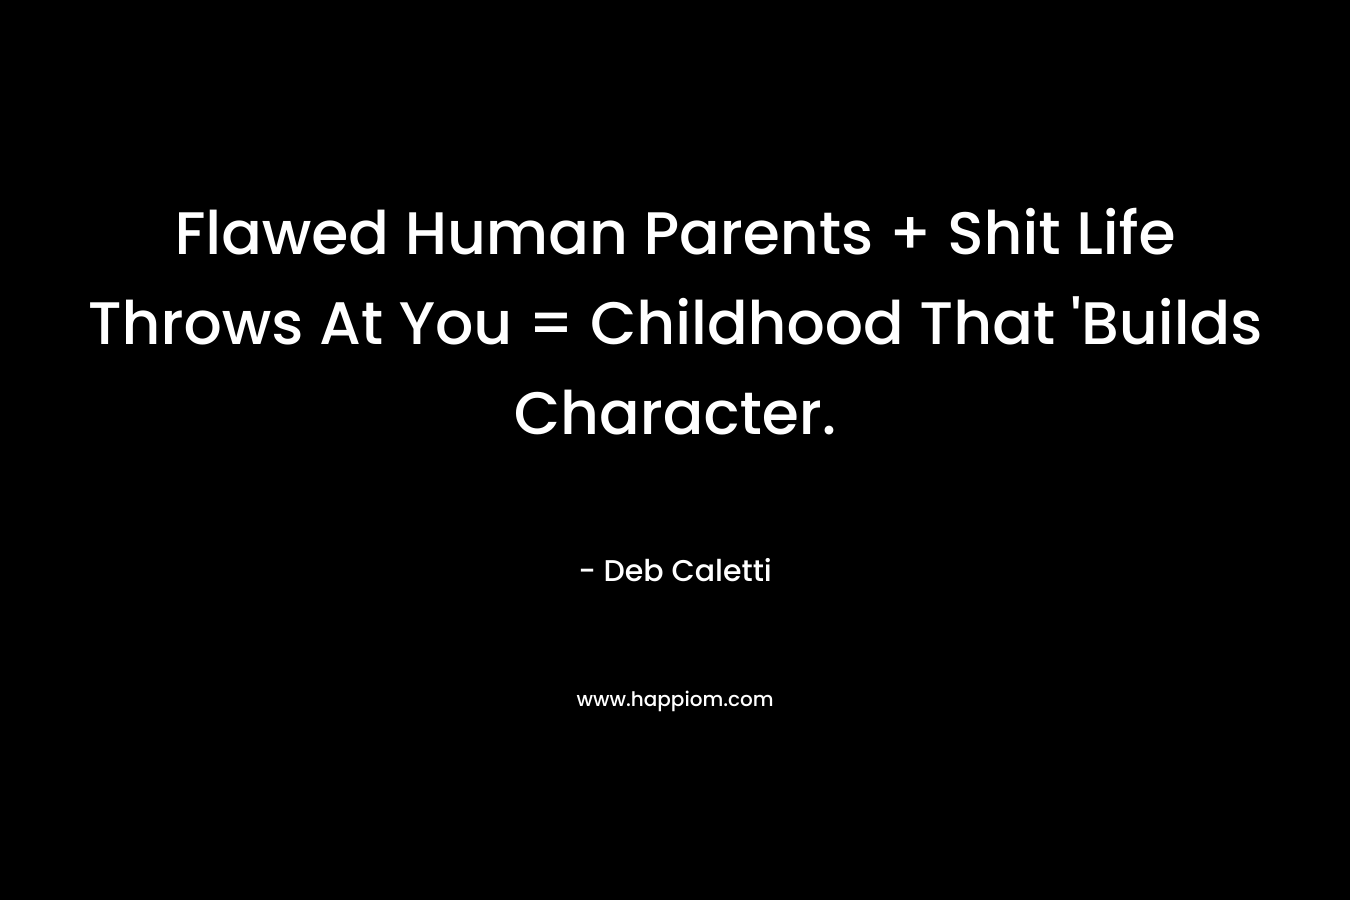 Flawed Human Parents + Shit Life Throws At You = Childhood That 'Builds Character.